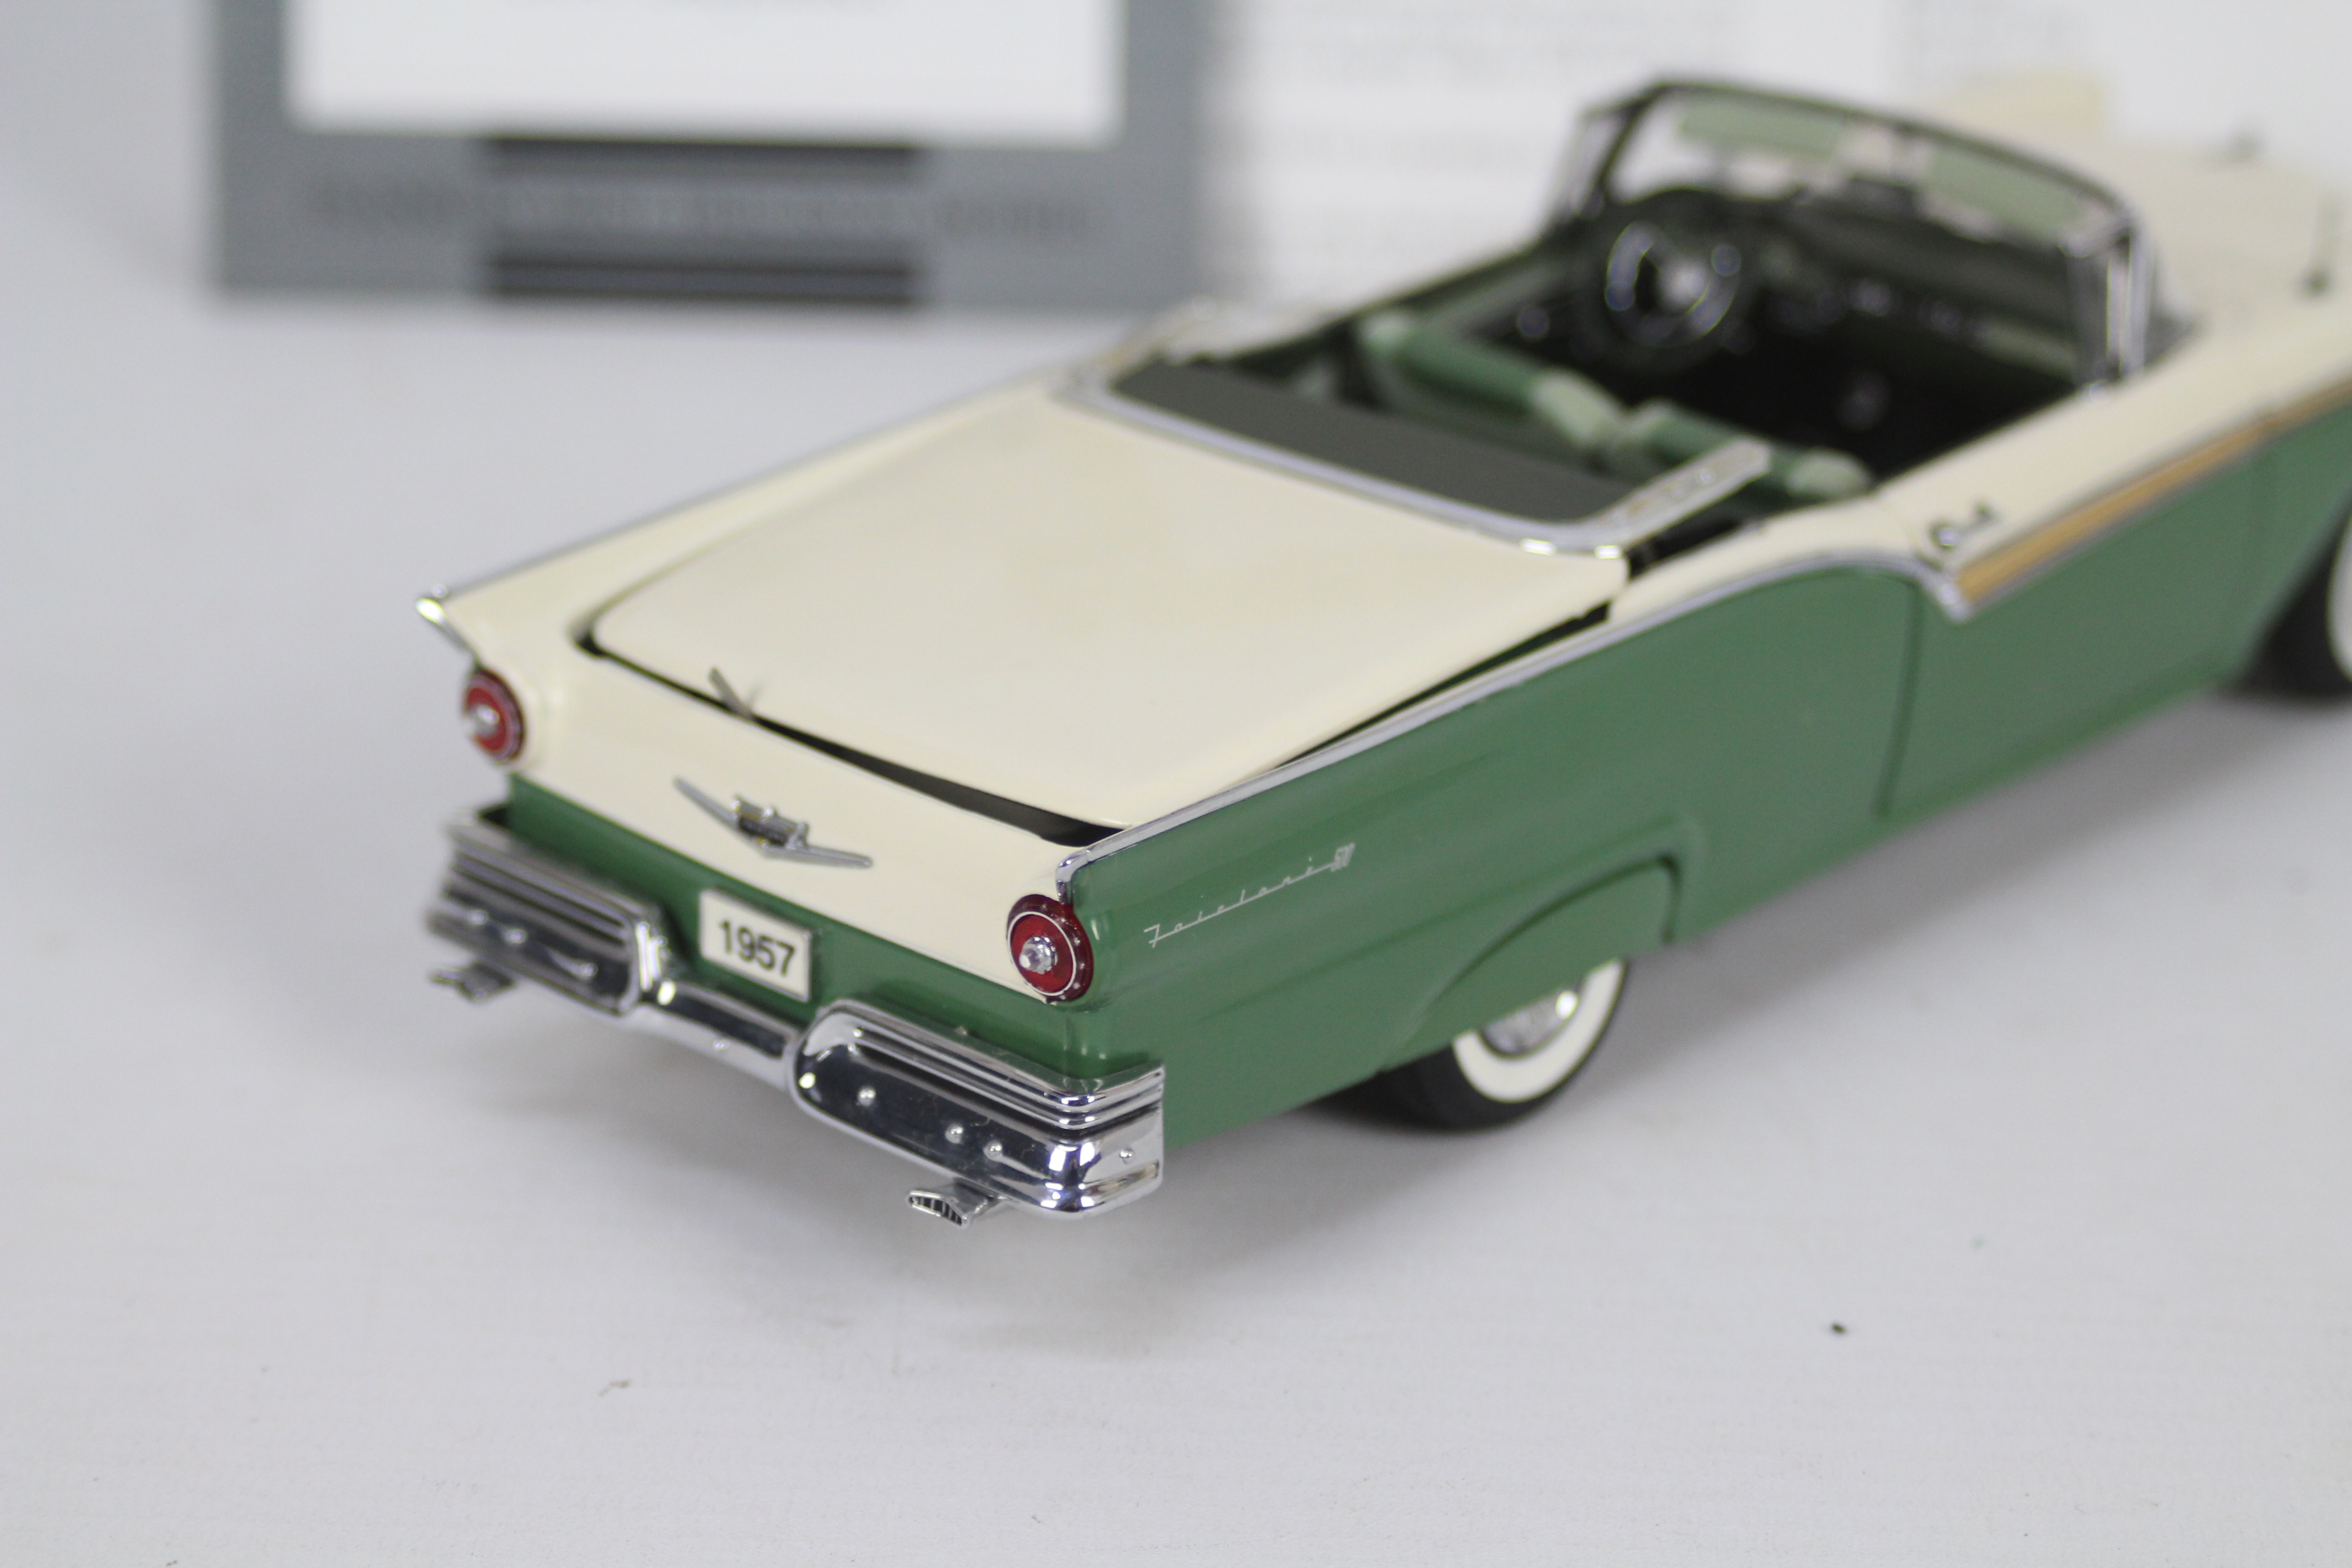 Franklin Mint - A boxed 1:24 scale 1957 Ford Fairlane 500 Skyliner by Franklin Mint. - Image 4 of 5